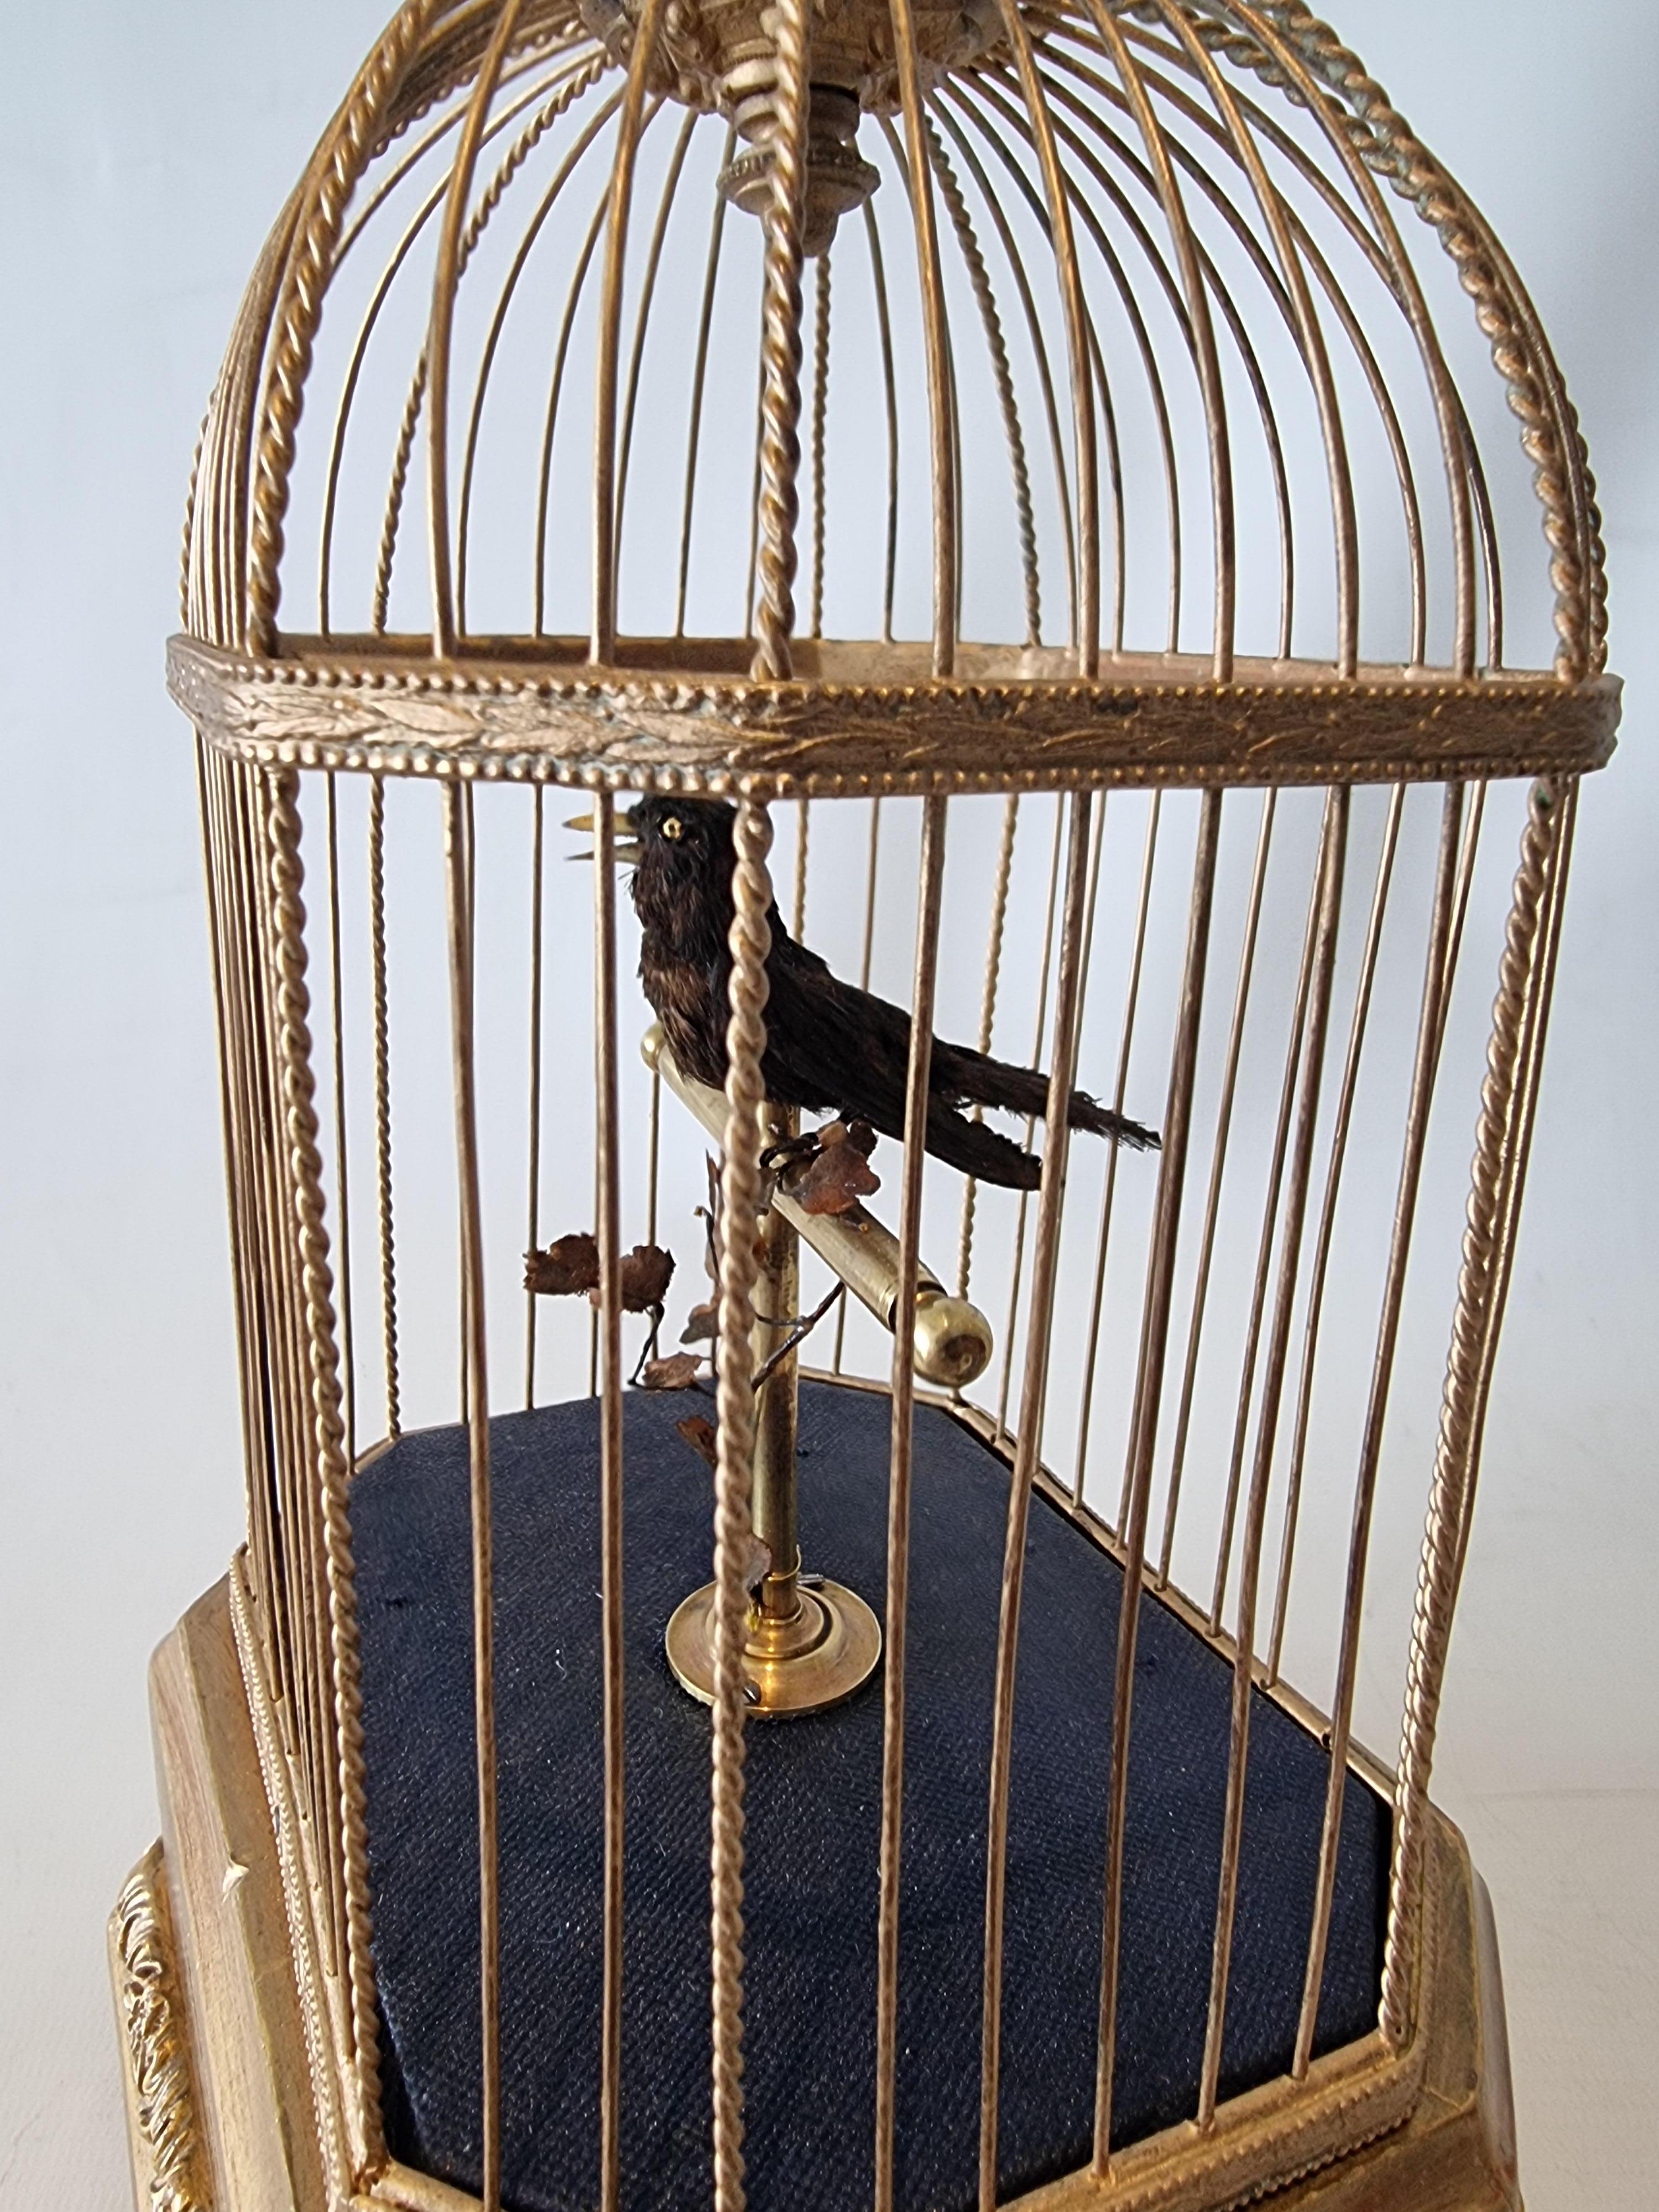 A very good  single singing bird in cage, by Karl Griesbaum,
 
German
 
Circa 1940
 
Continuous and paused action
 
A petit wonder of style and grace...
 
When wound and the start/stop/pause lever actuated, the bird on perch springs into life by